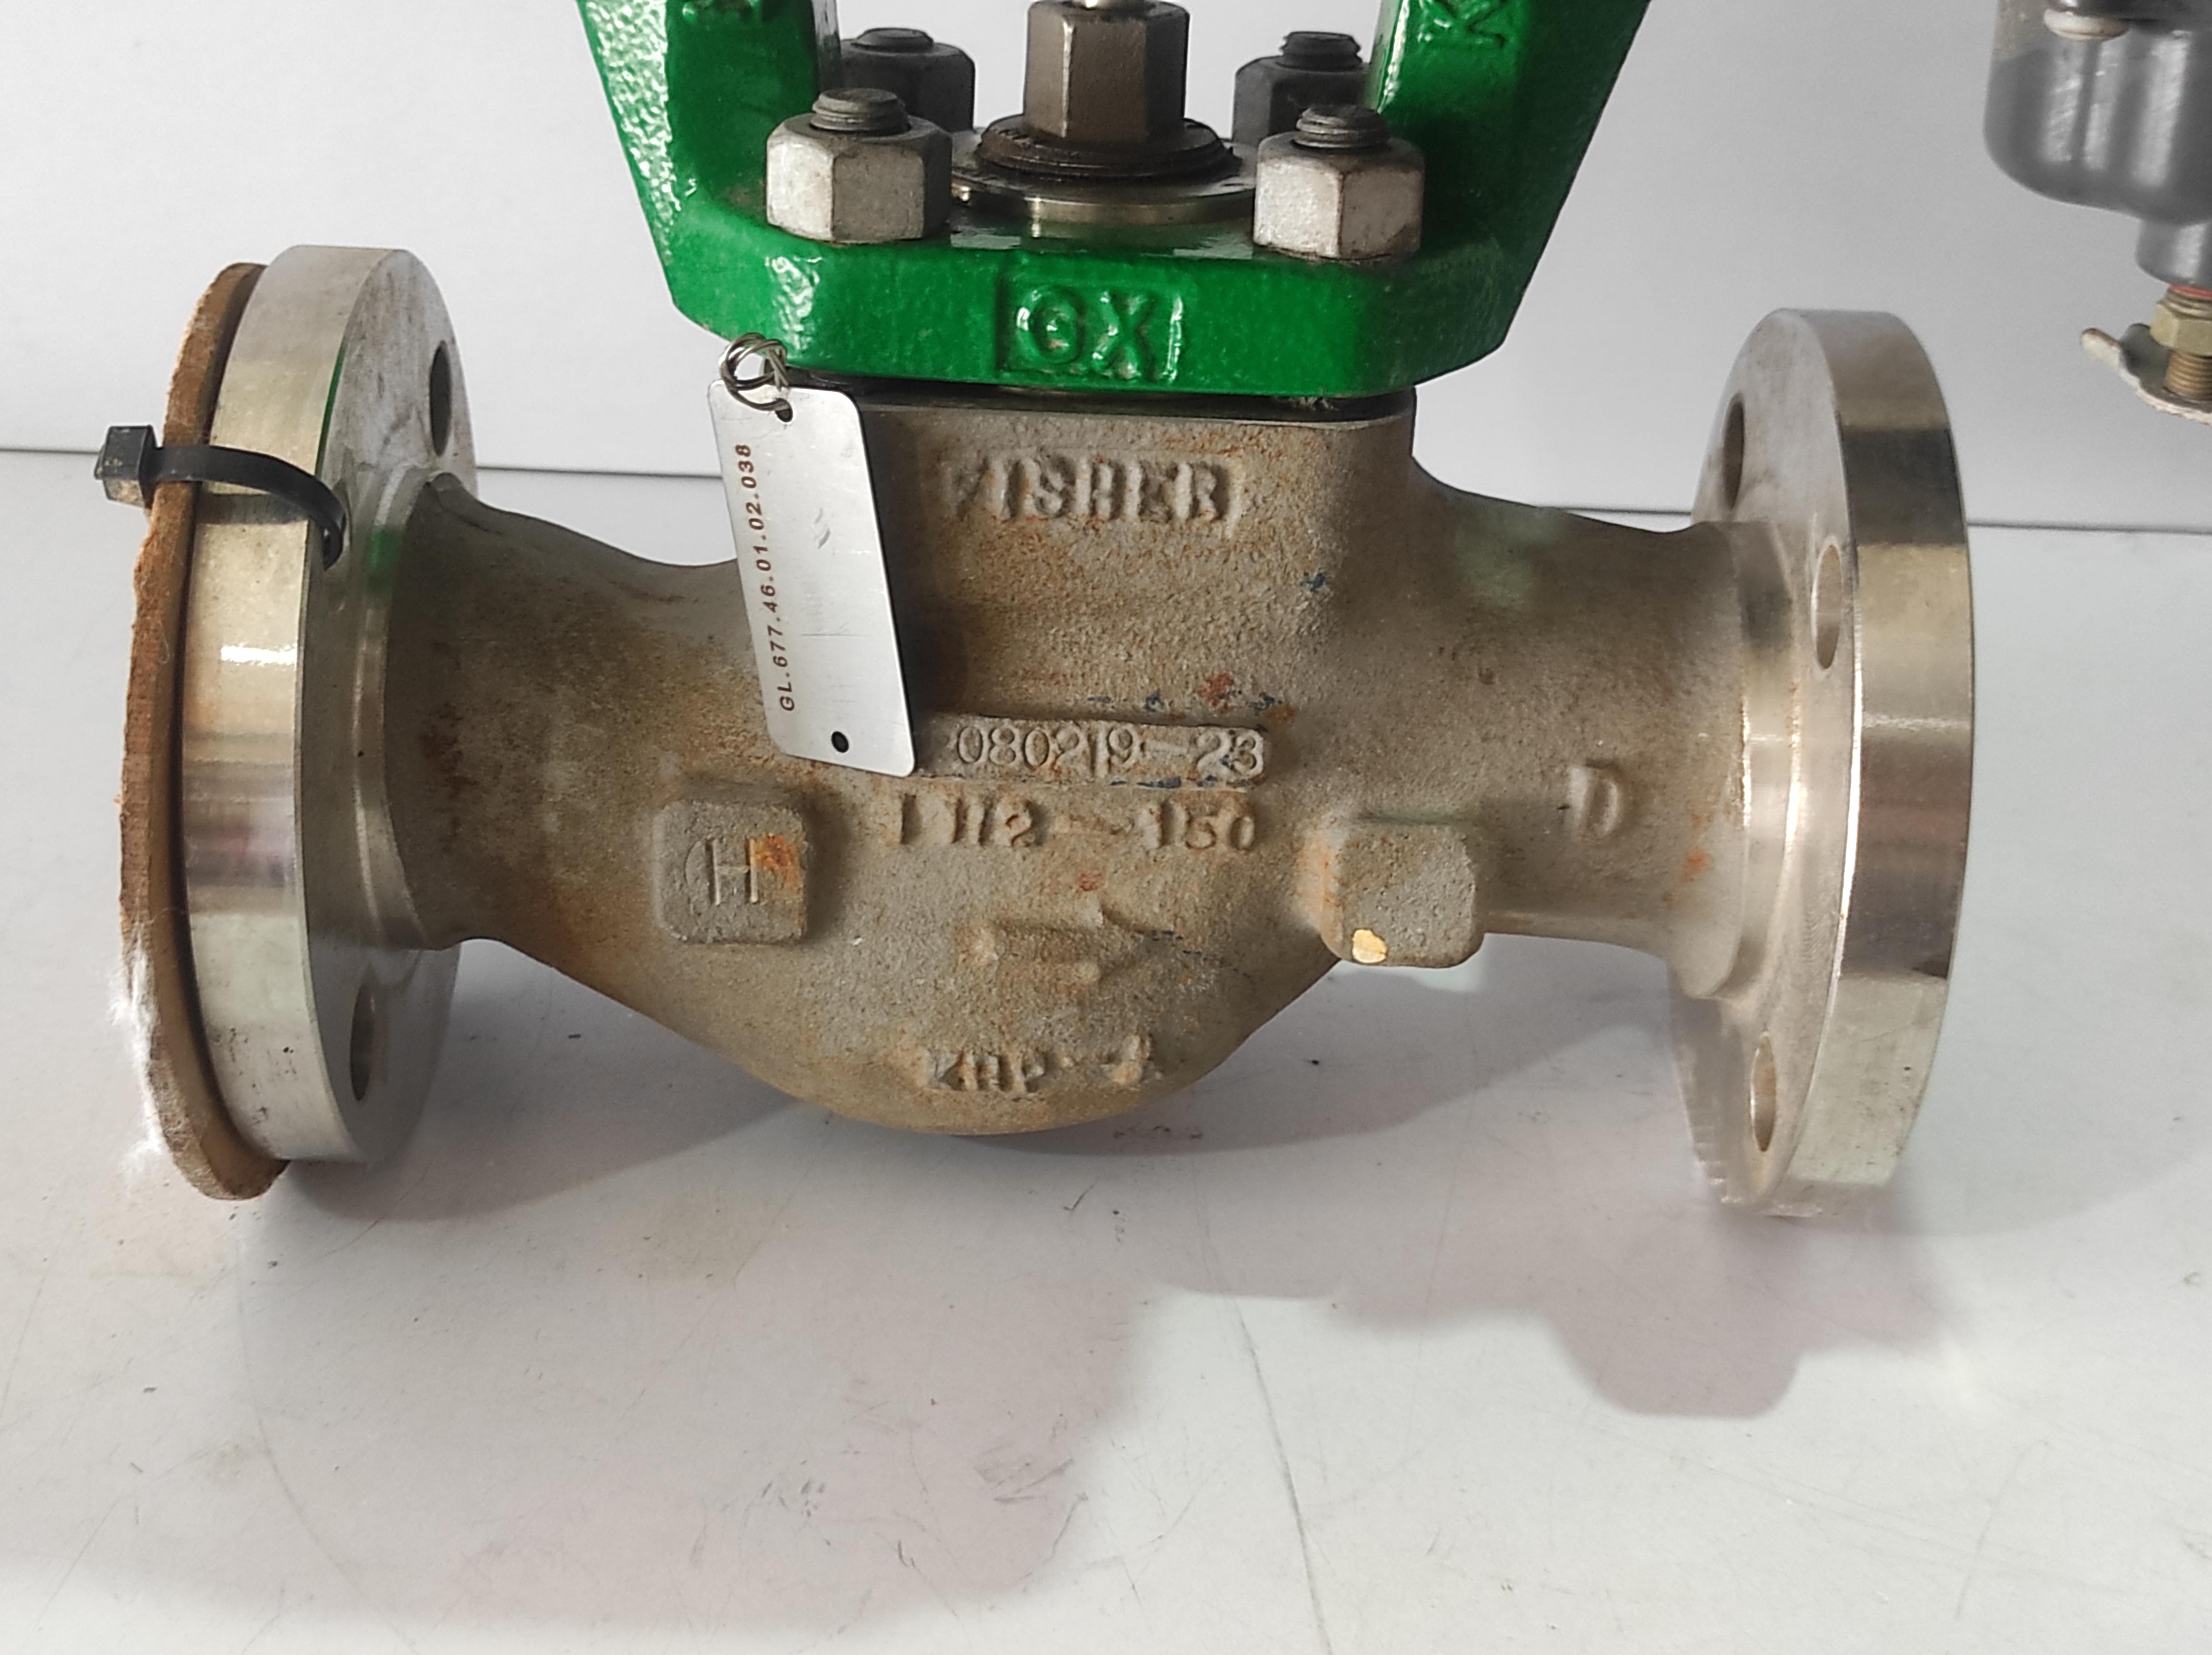 Fisher Design GX NPS 1 1_2 CL150 2020 225-A3 GX Control Valve And Actuator System